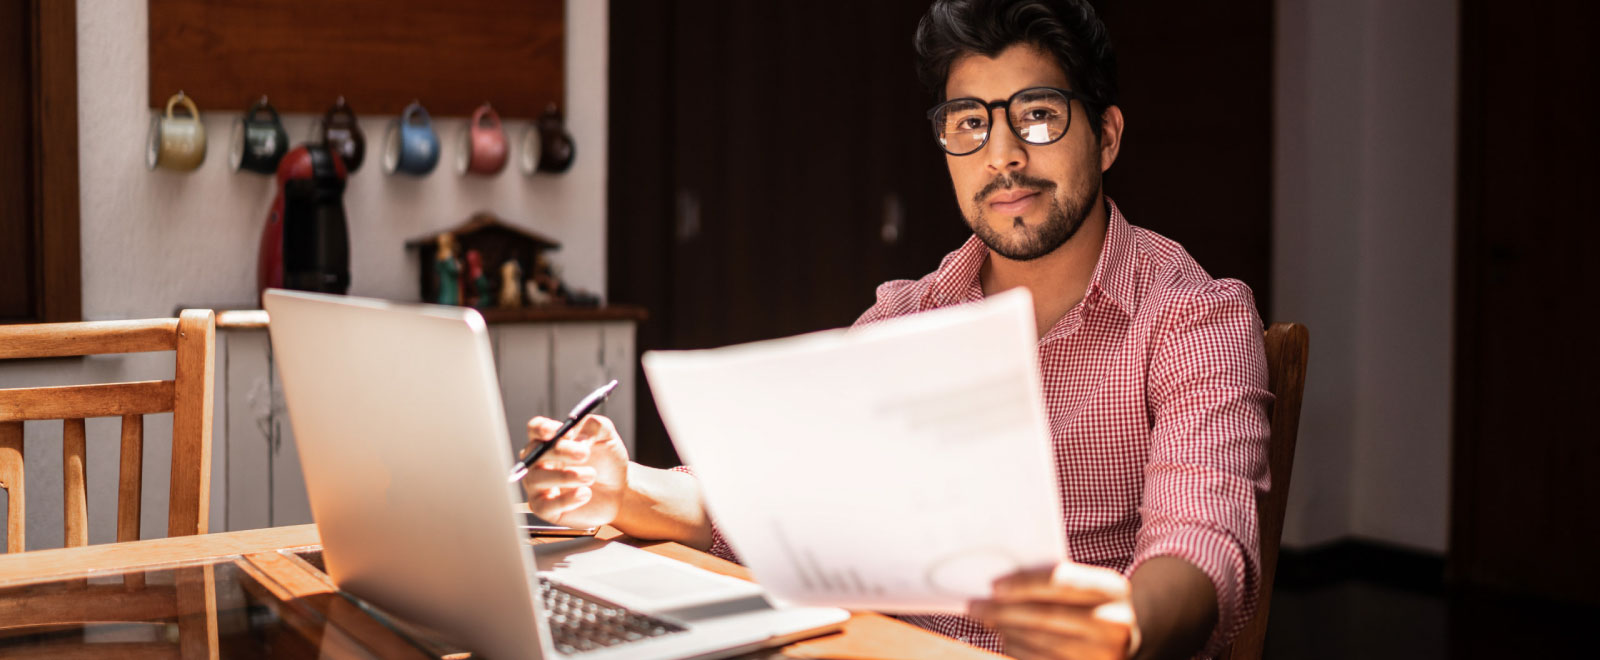 hopeful man reviewing finances on computer